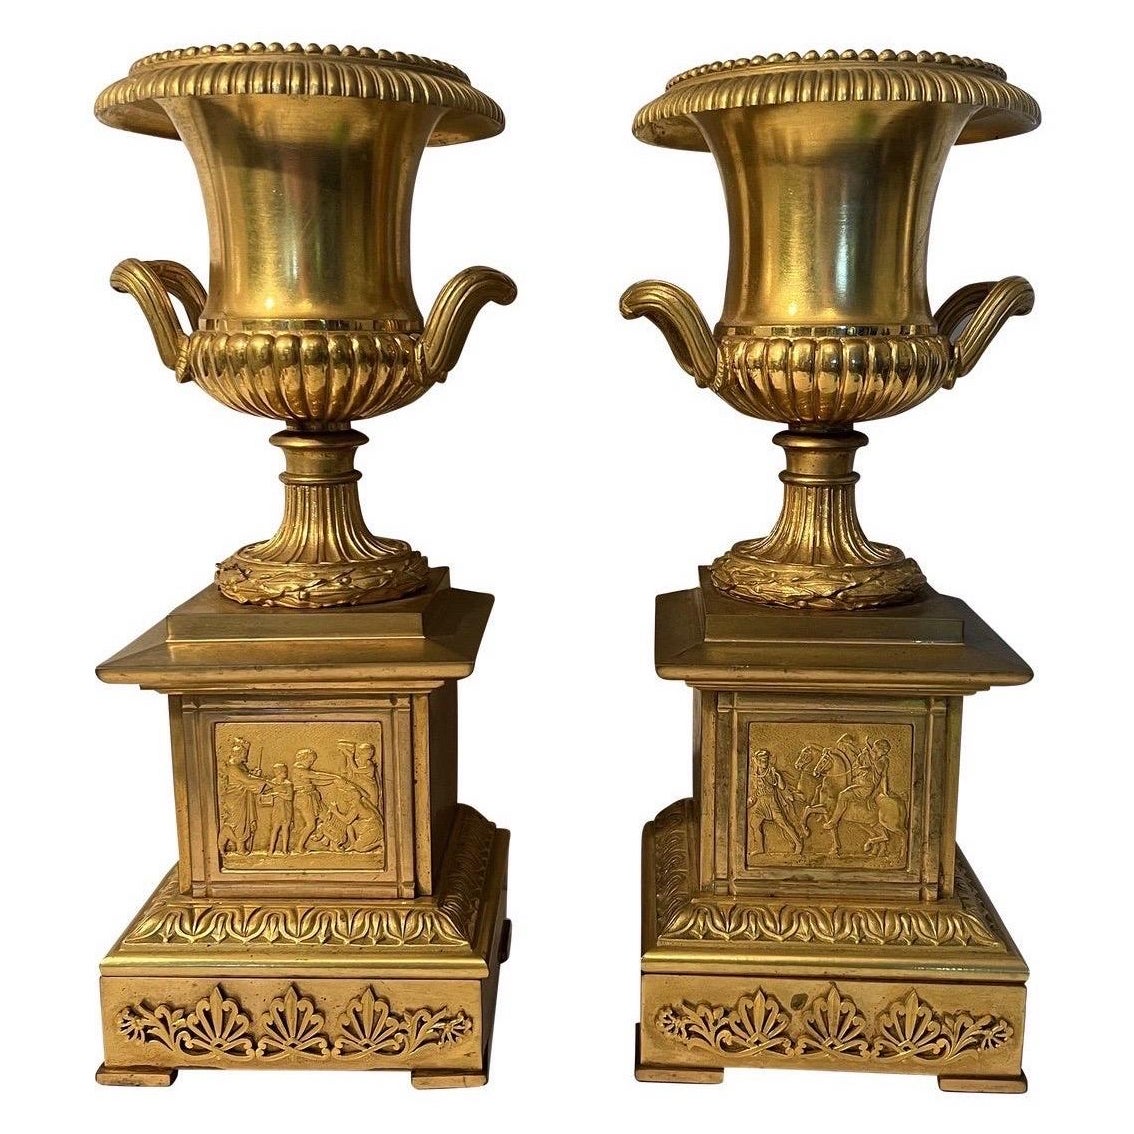 19th Century Neoclassical Gilt Bronze Grand Tour Mounted Urns, a Pair